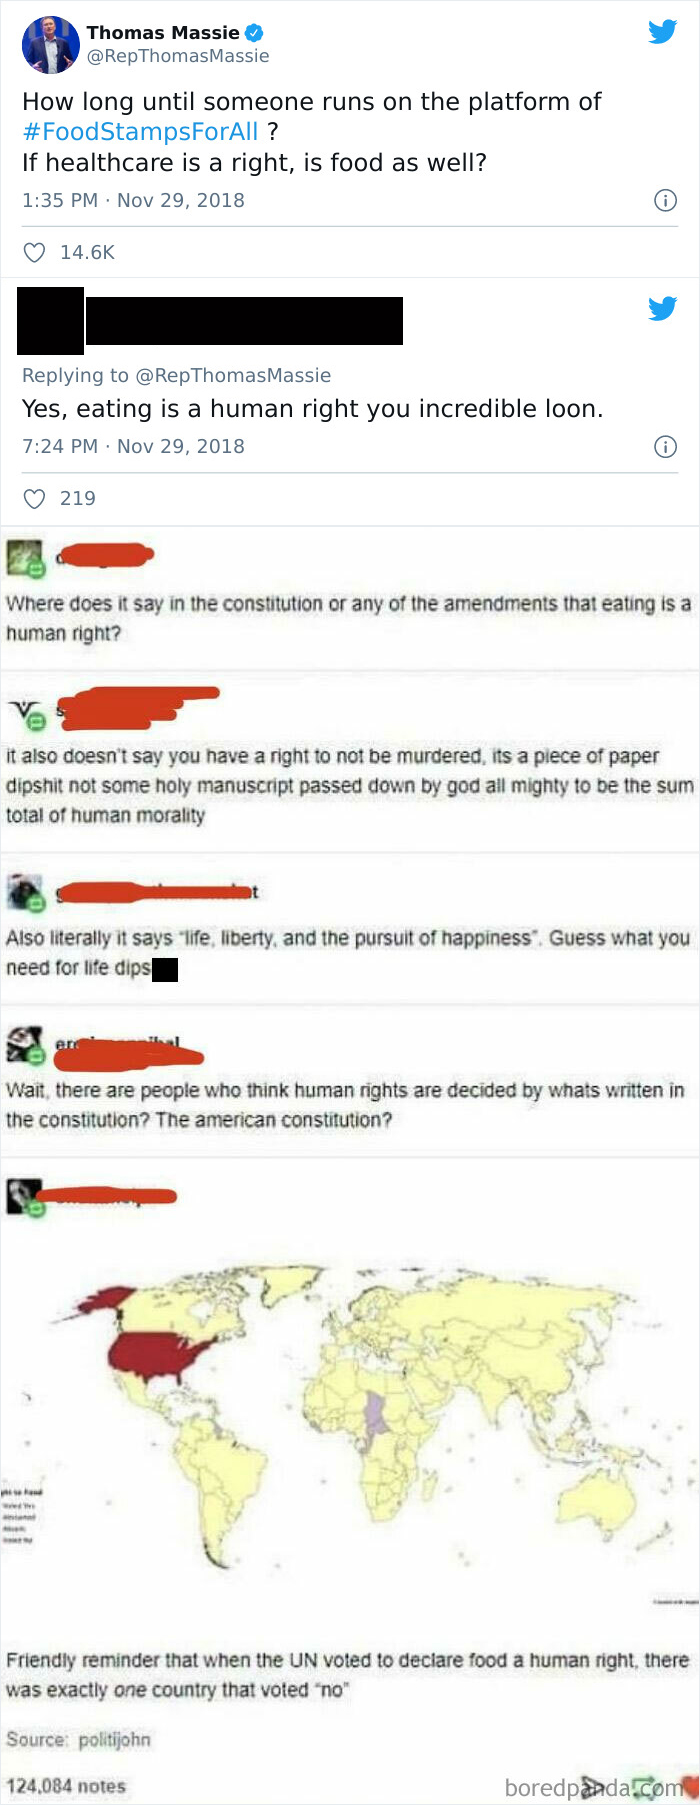 Where Does It Say In The Constitution Or Any Of The Amendments That Eating Is A Human Right?